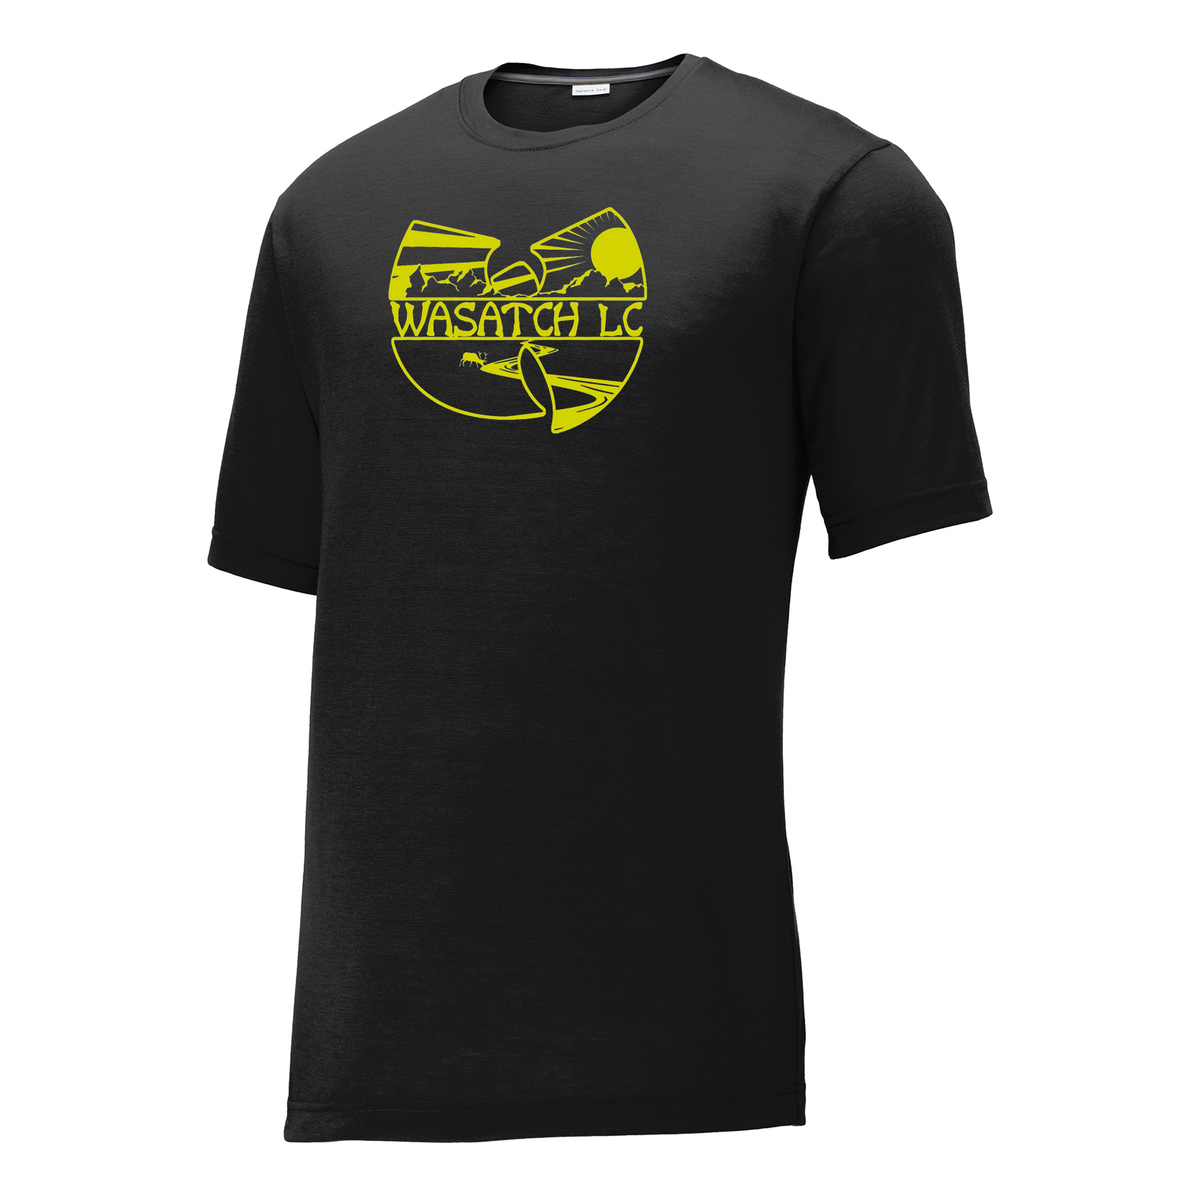 Wasatch LC CottonTouch Performance T-Shirt